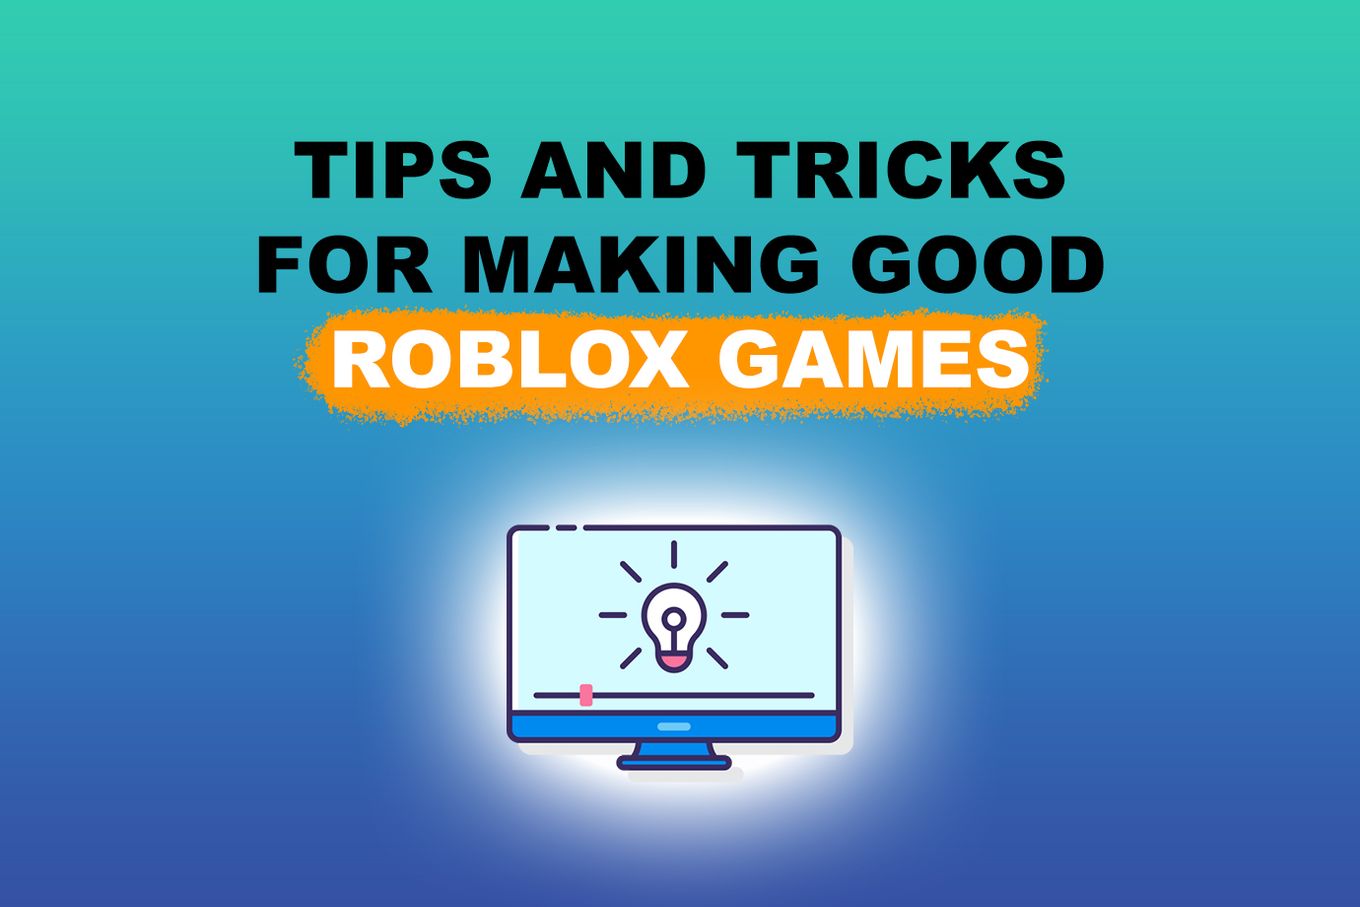 Tips and tricks for making good Roblox games